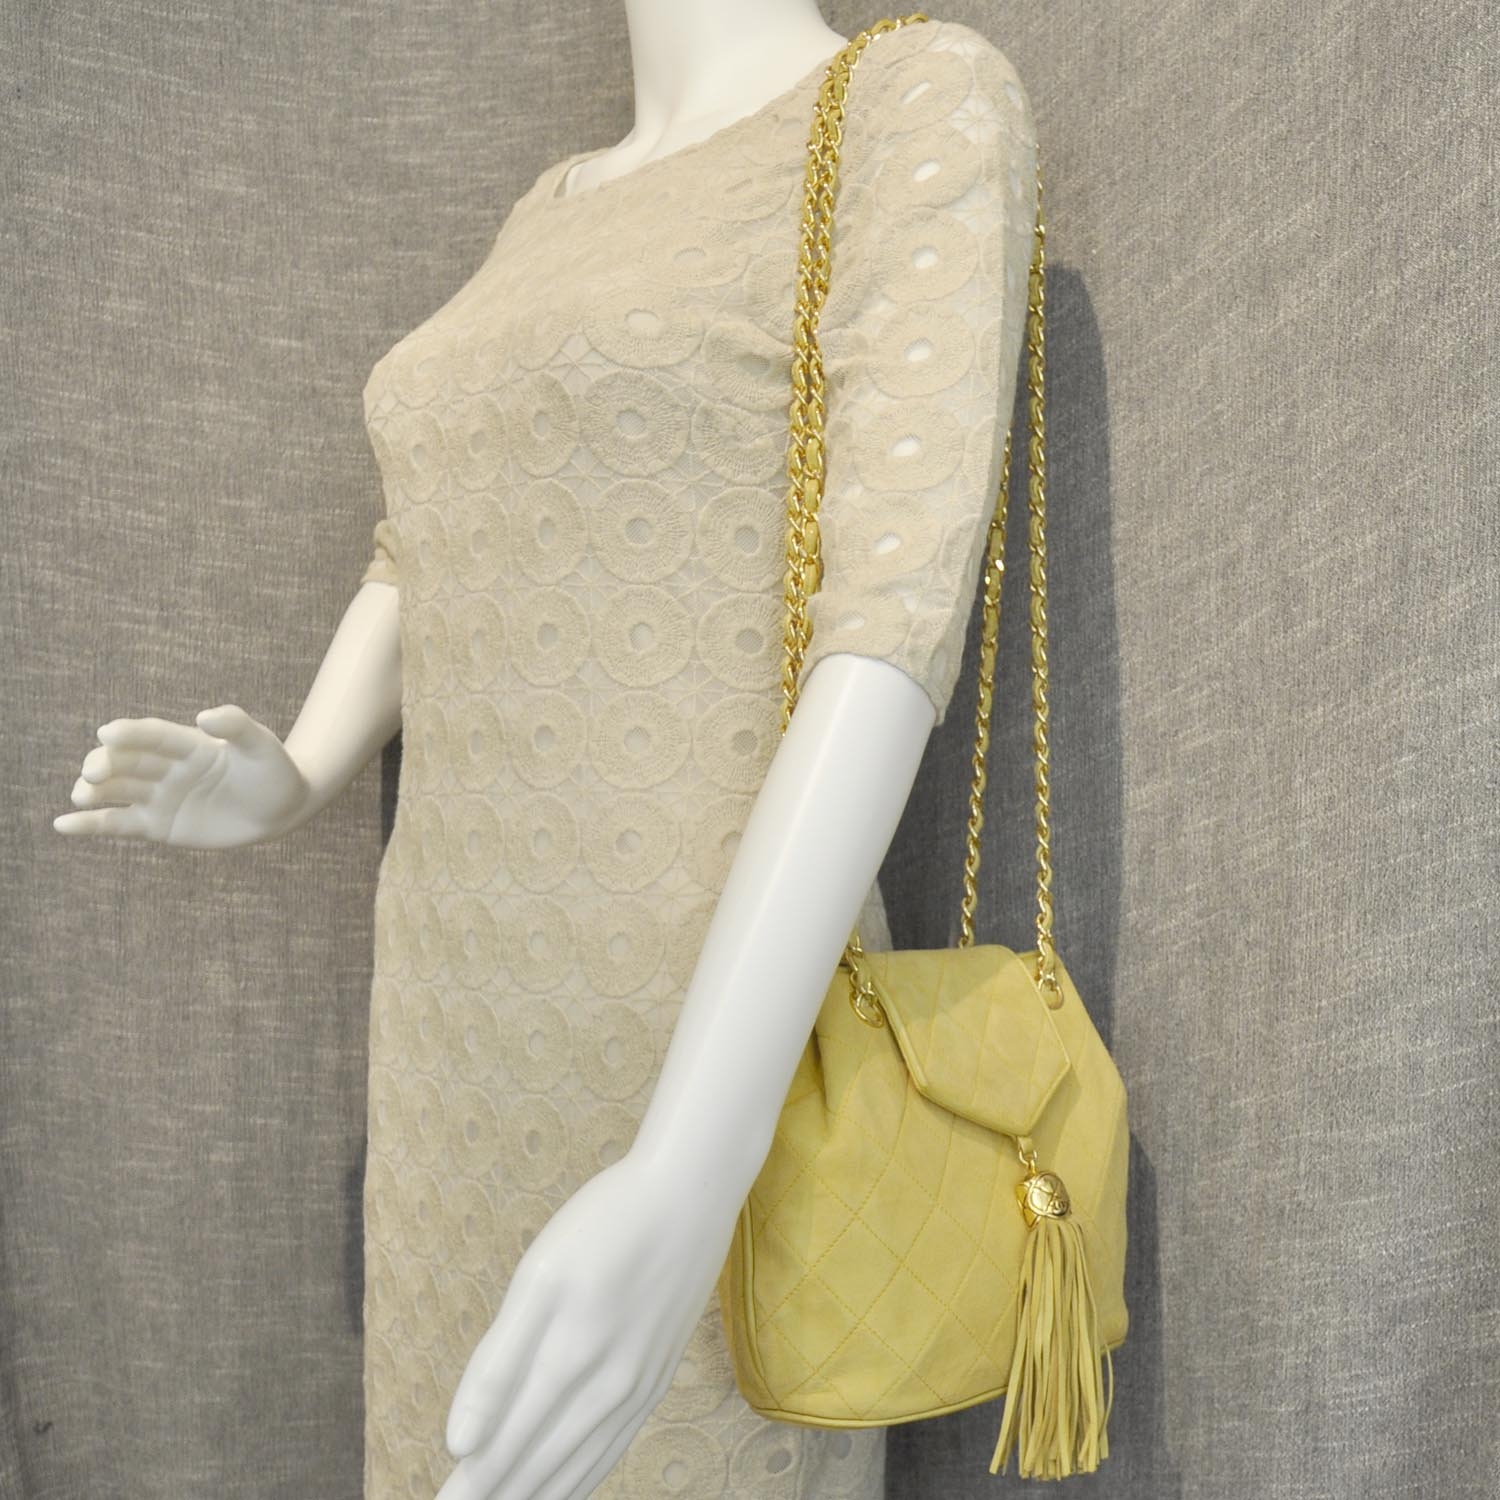 CHANEL Suede Quilted Tassel Shoulder Bag Yellow 23816